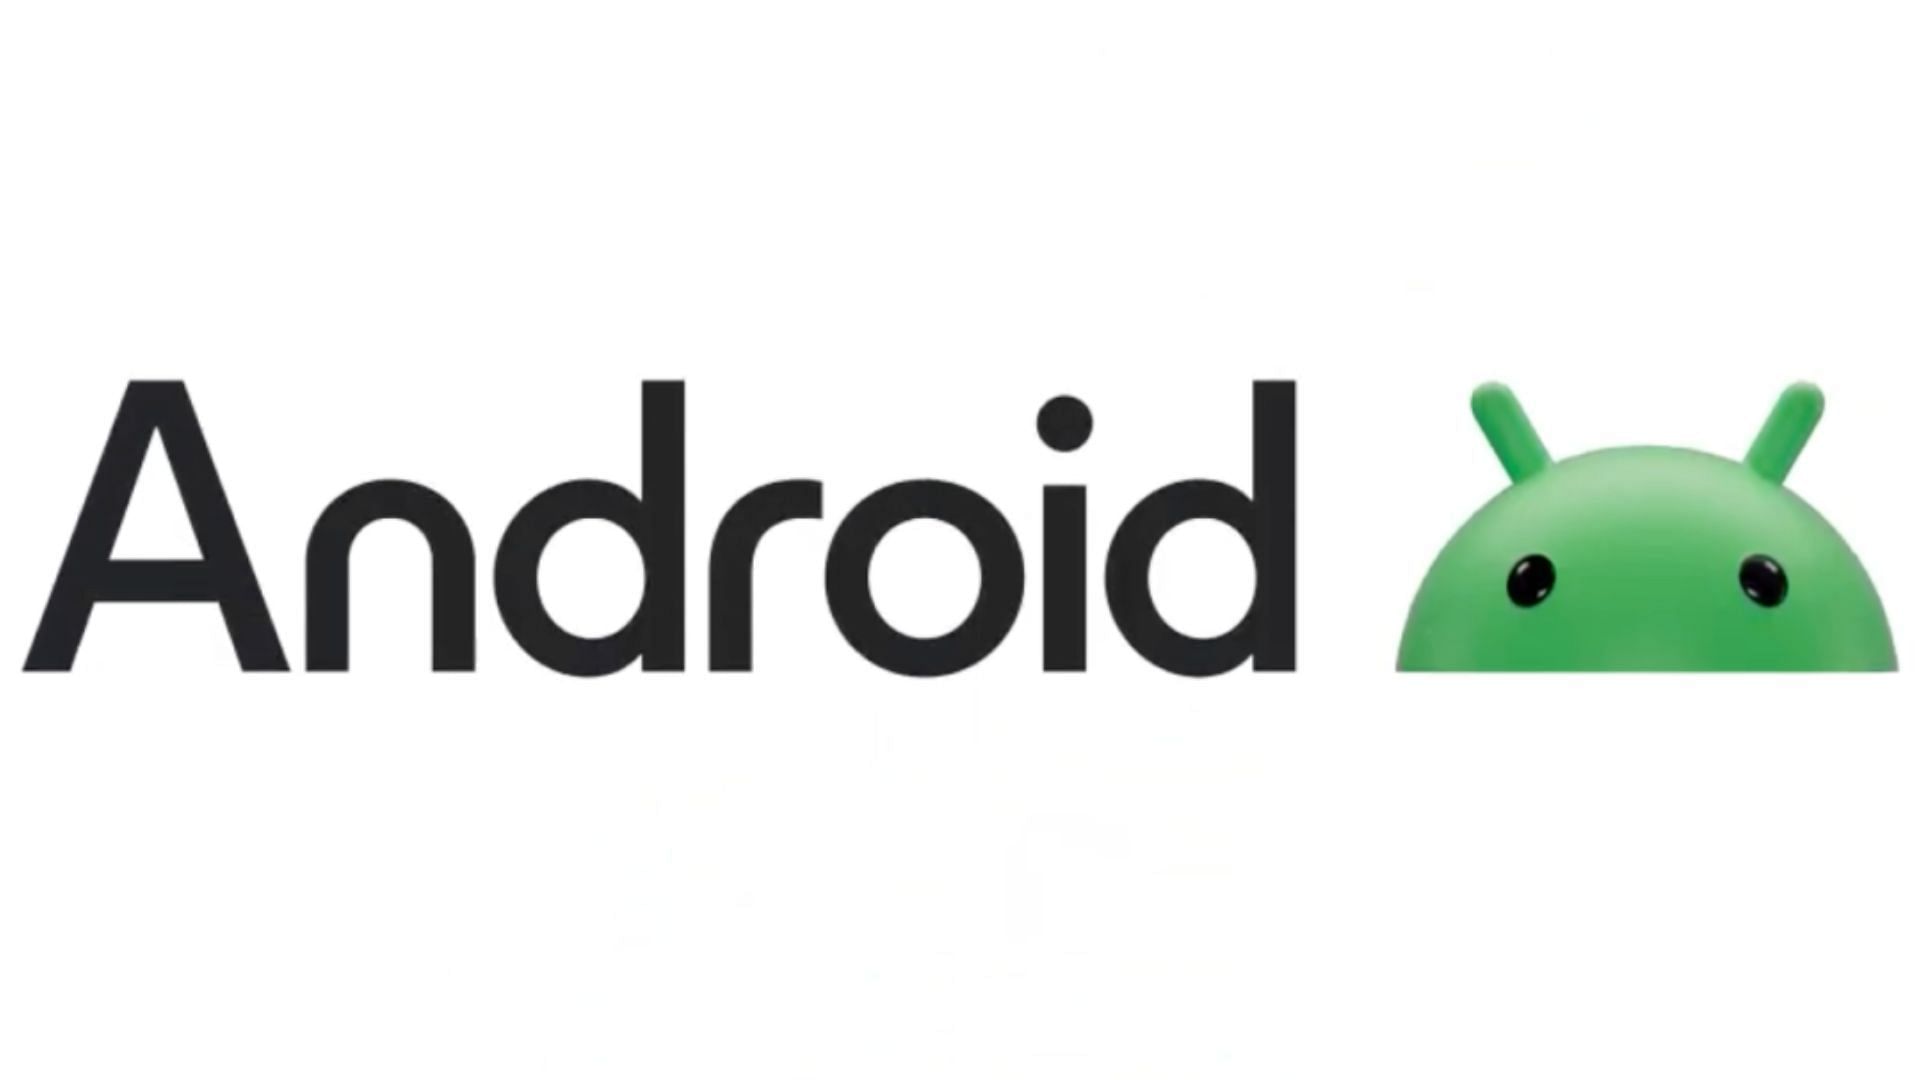 The new Android logo with the 3D robot (Image via Google)